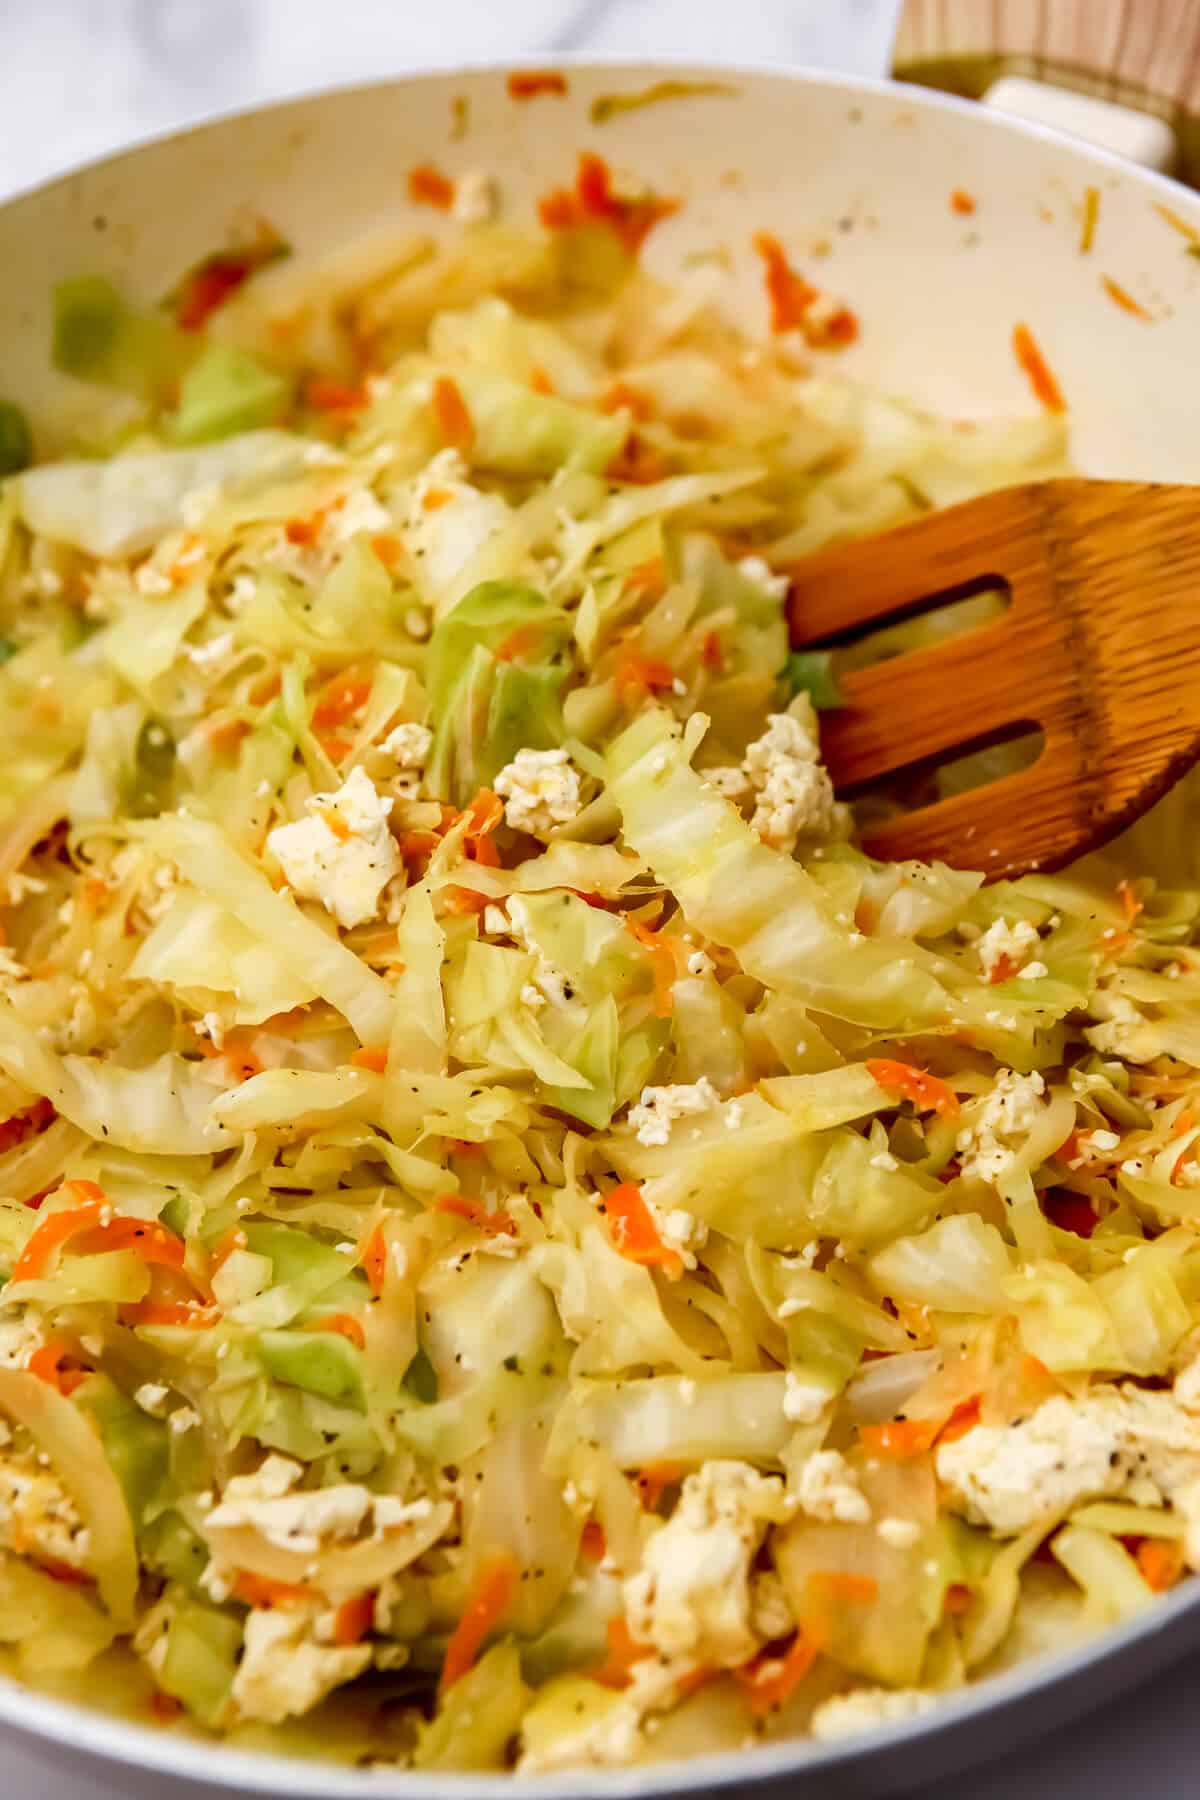 A large frying pan filled with onions, cabbage, carrots and tofu before adding the noodles to make haluski.